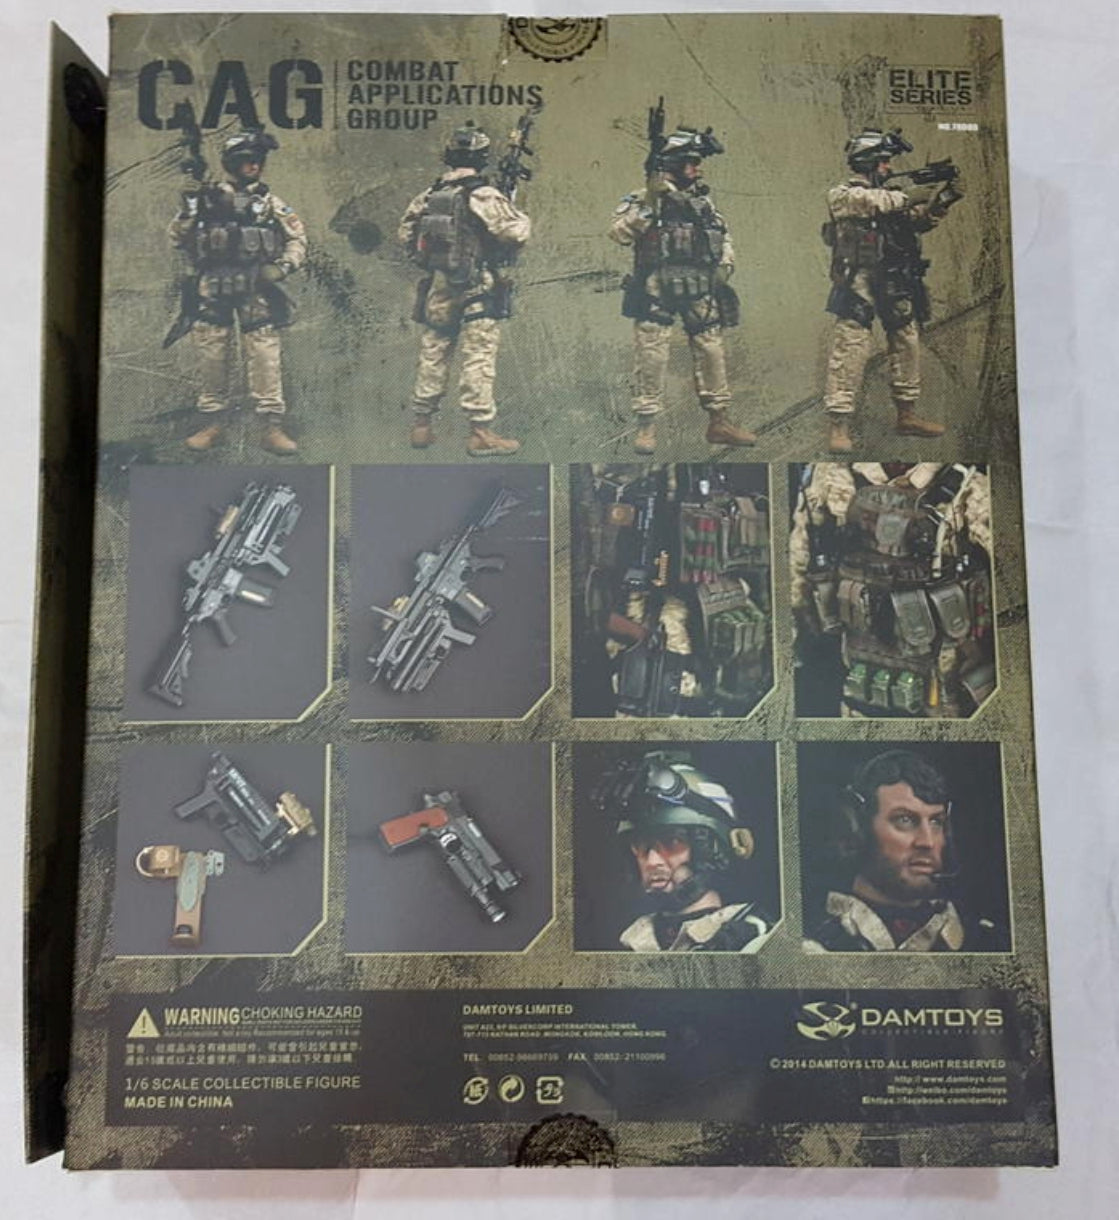 DamToys 1/6 12" CAG Combat Applications Group Action Figure